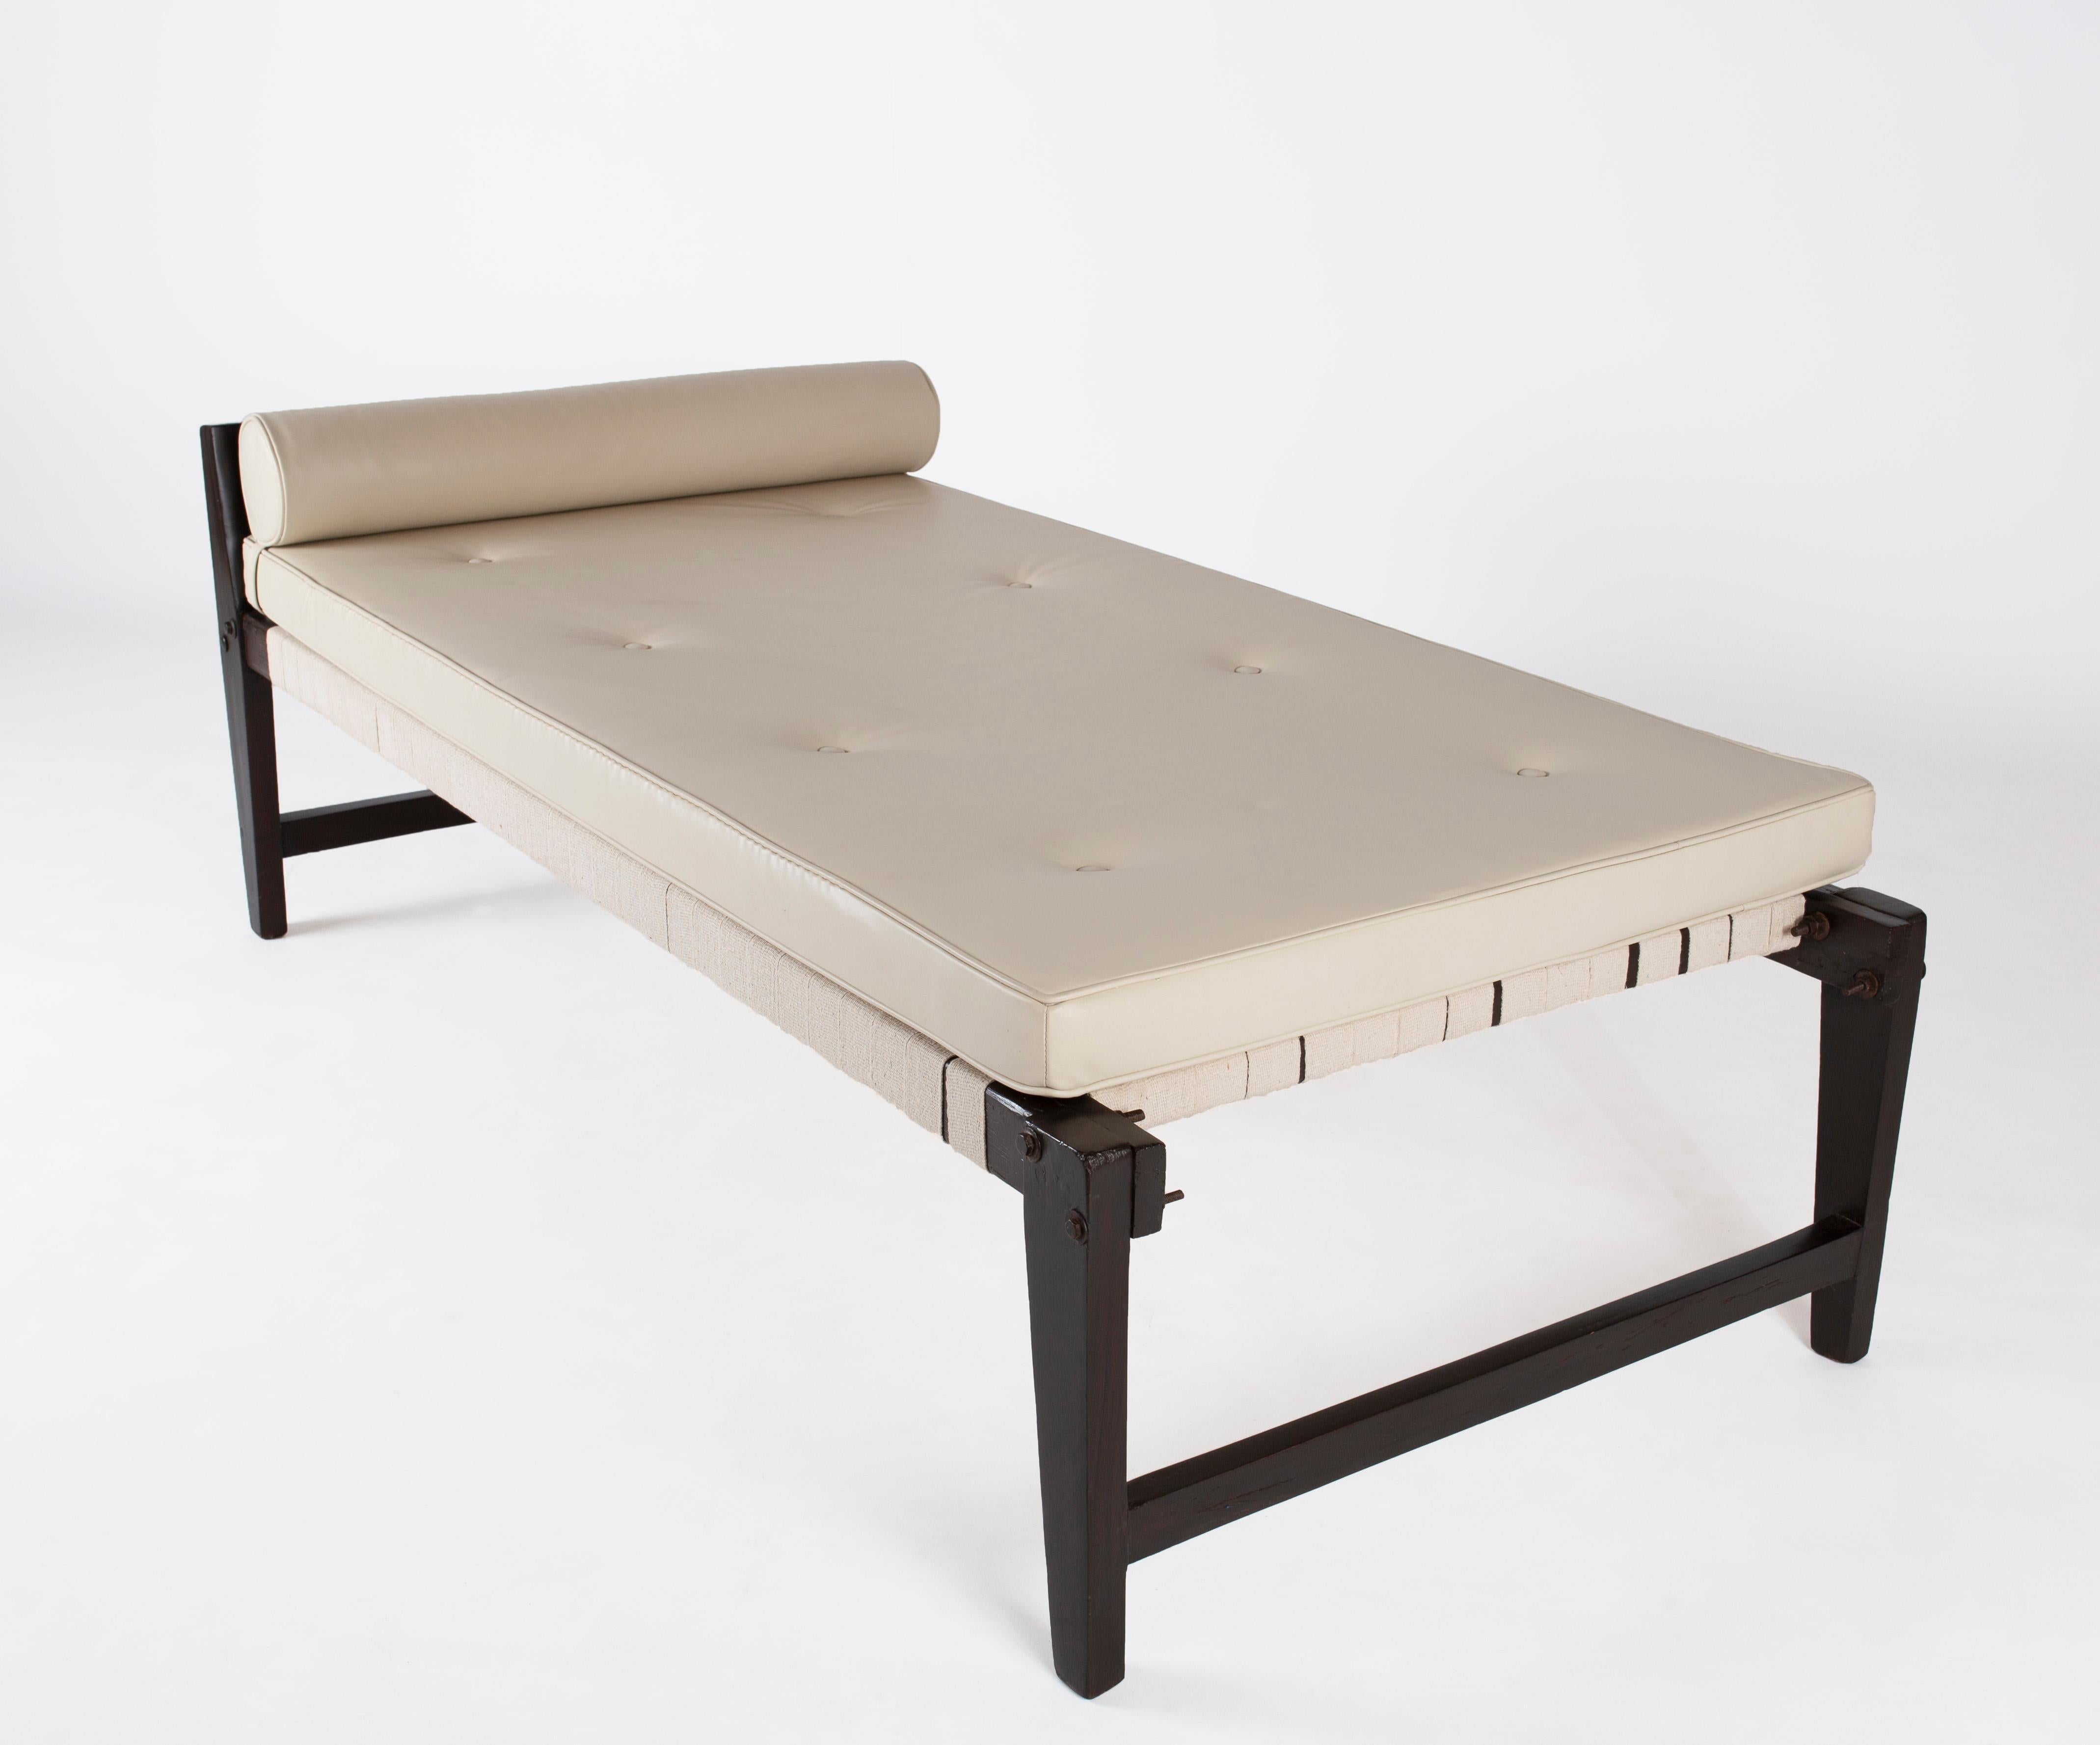 Pierre Jeanneret, De-mountable Daybed with Headrest in Stained Cedar Wood, Cotton Straps and Leather upholstery. 
Provenance: Commissioned for MLA Hostel and Flats, Private Residences, Chandigarh, India